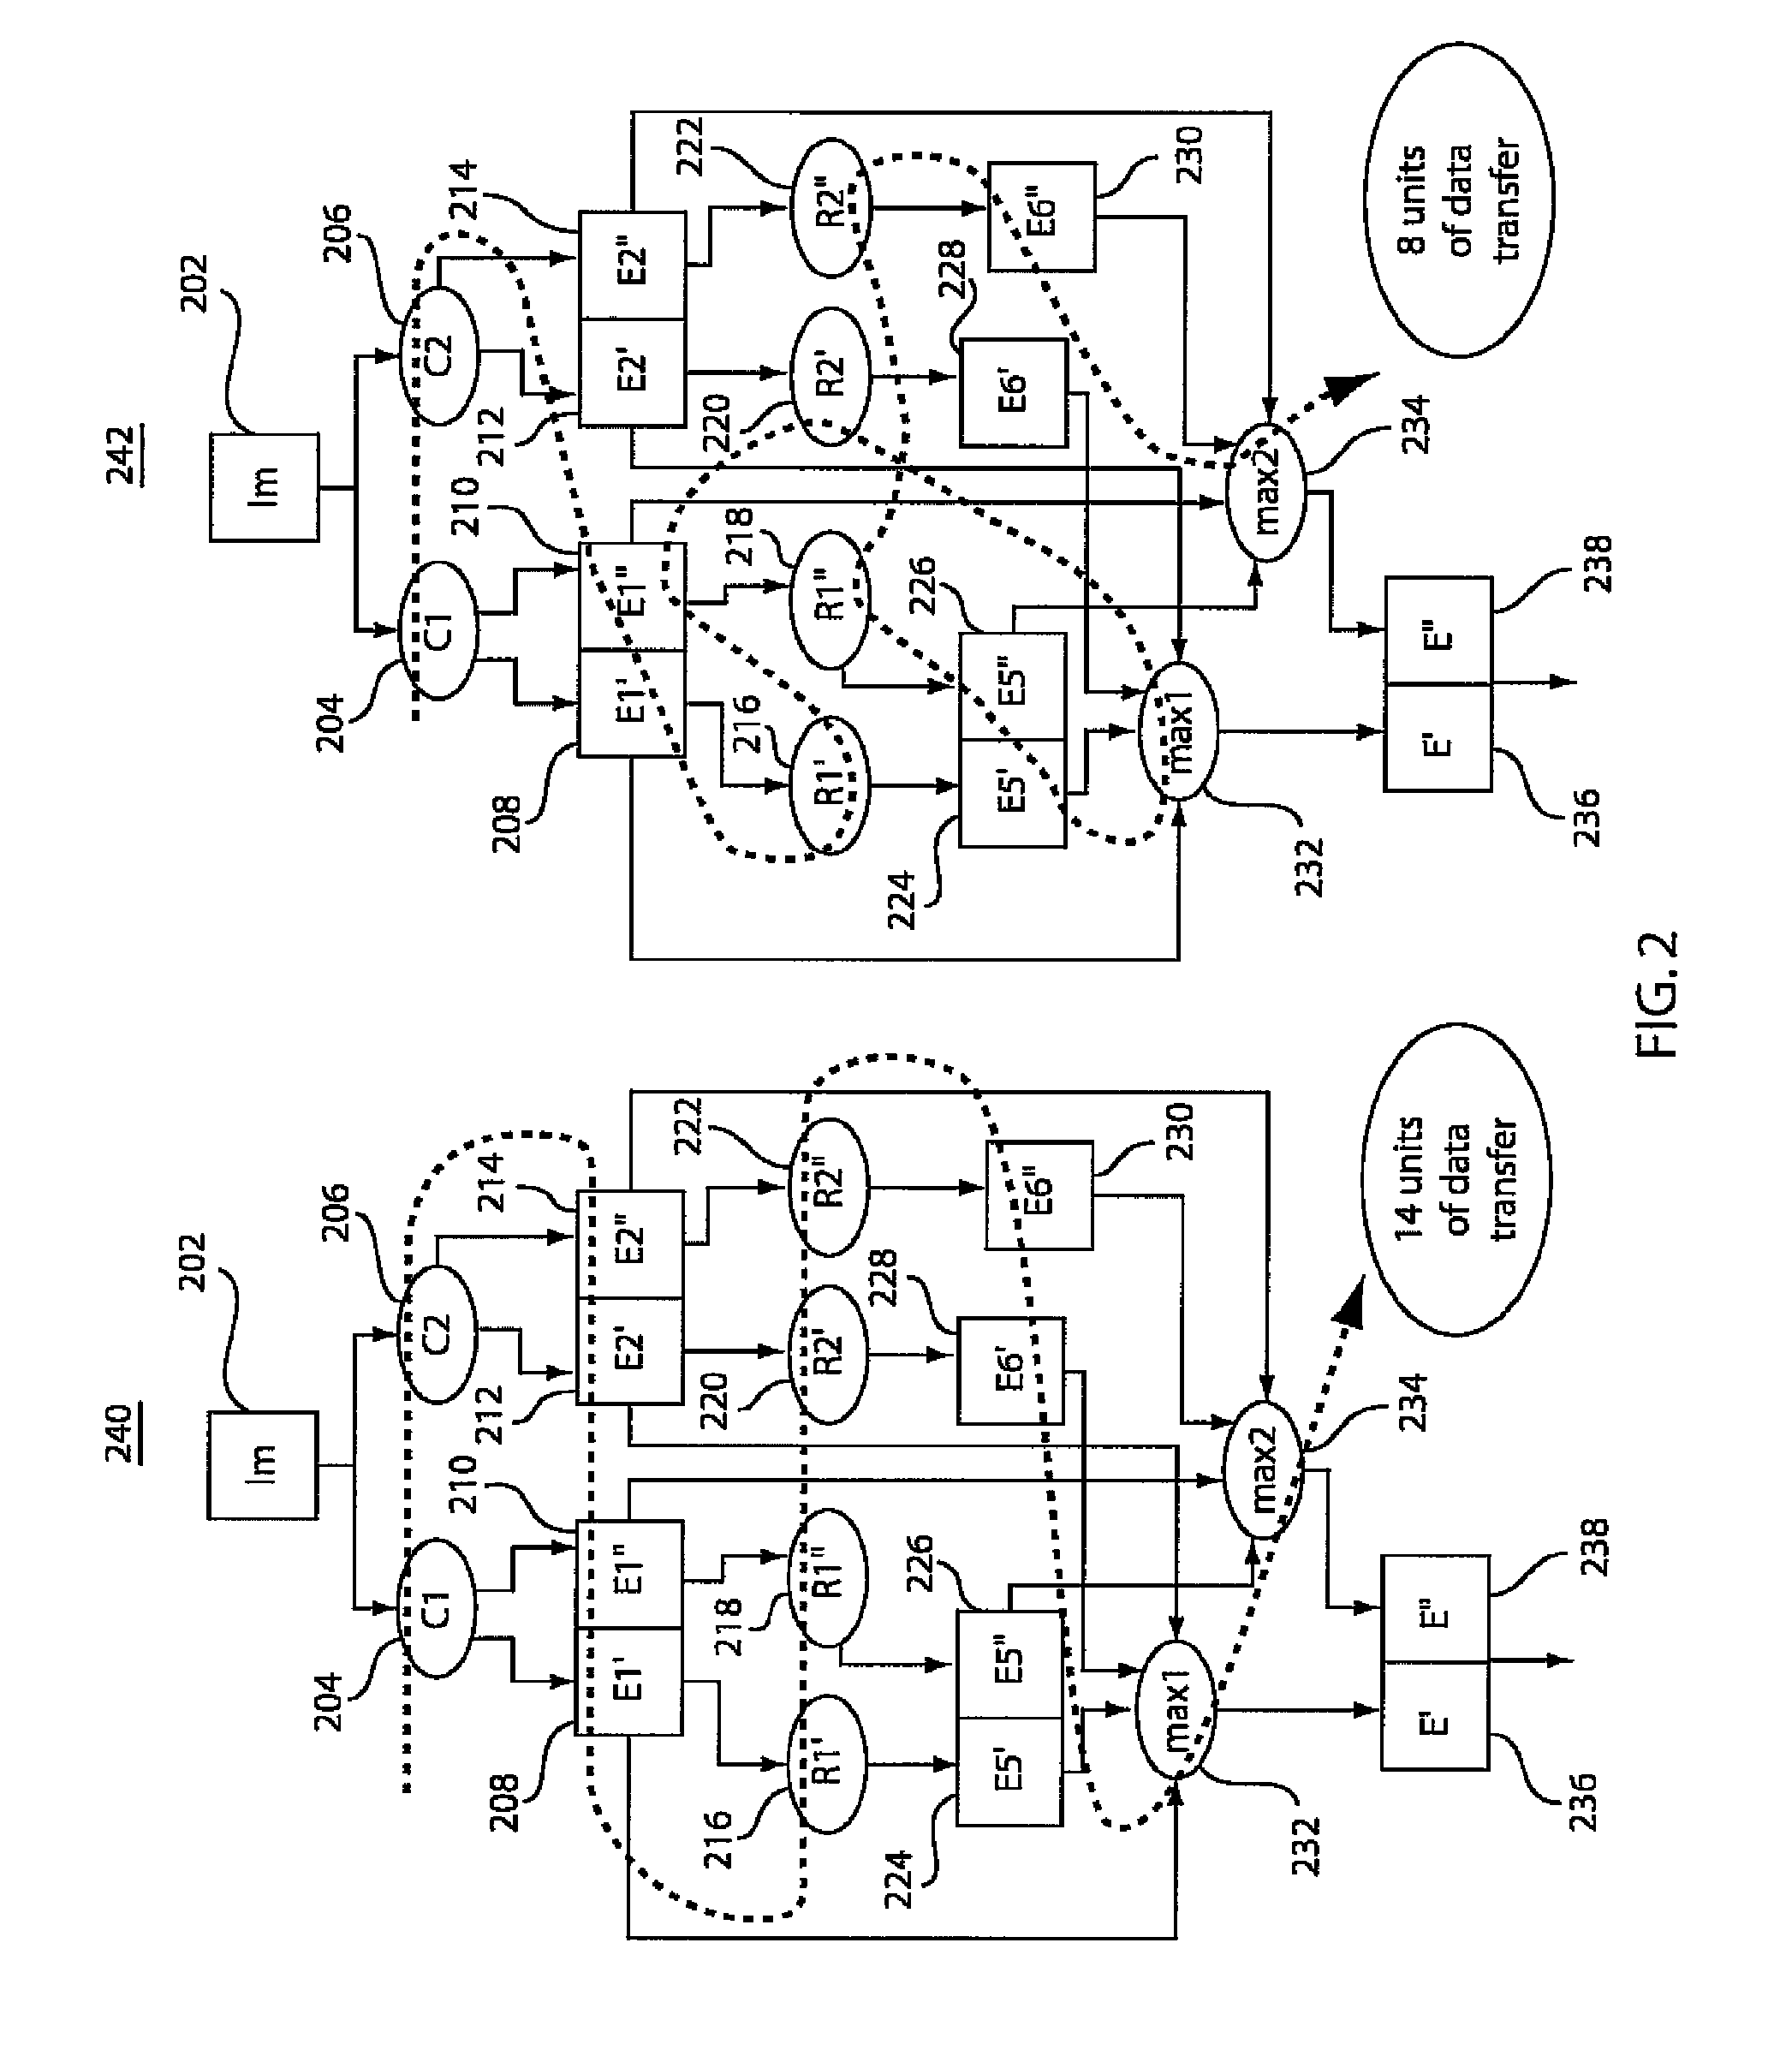 Methods and systems for managing computations on a hybrid computing platform including a parallel accelerator